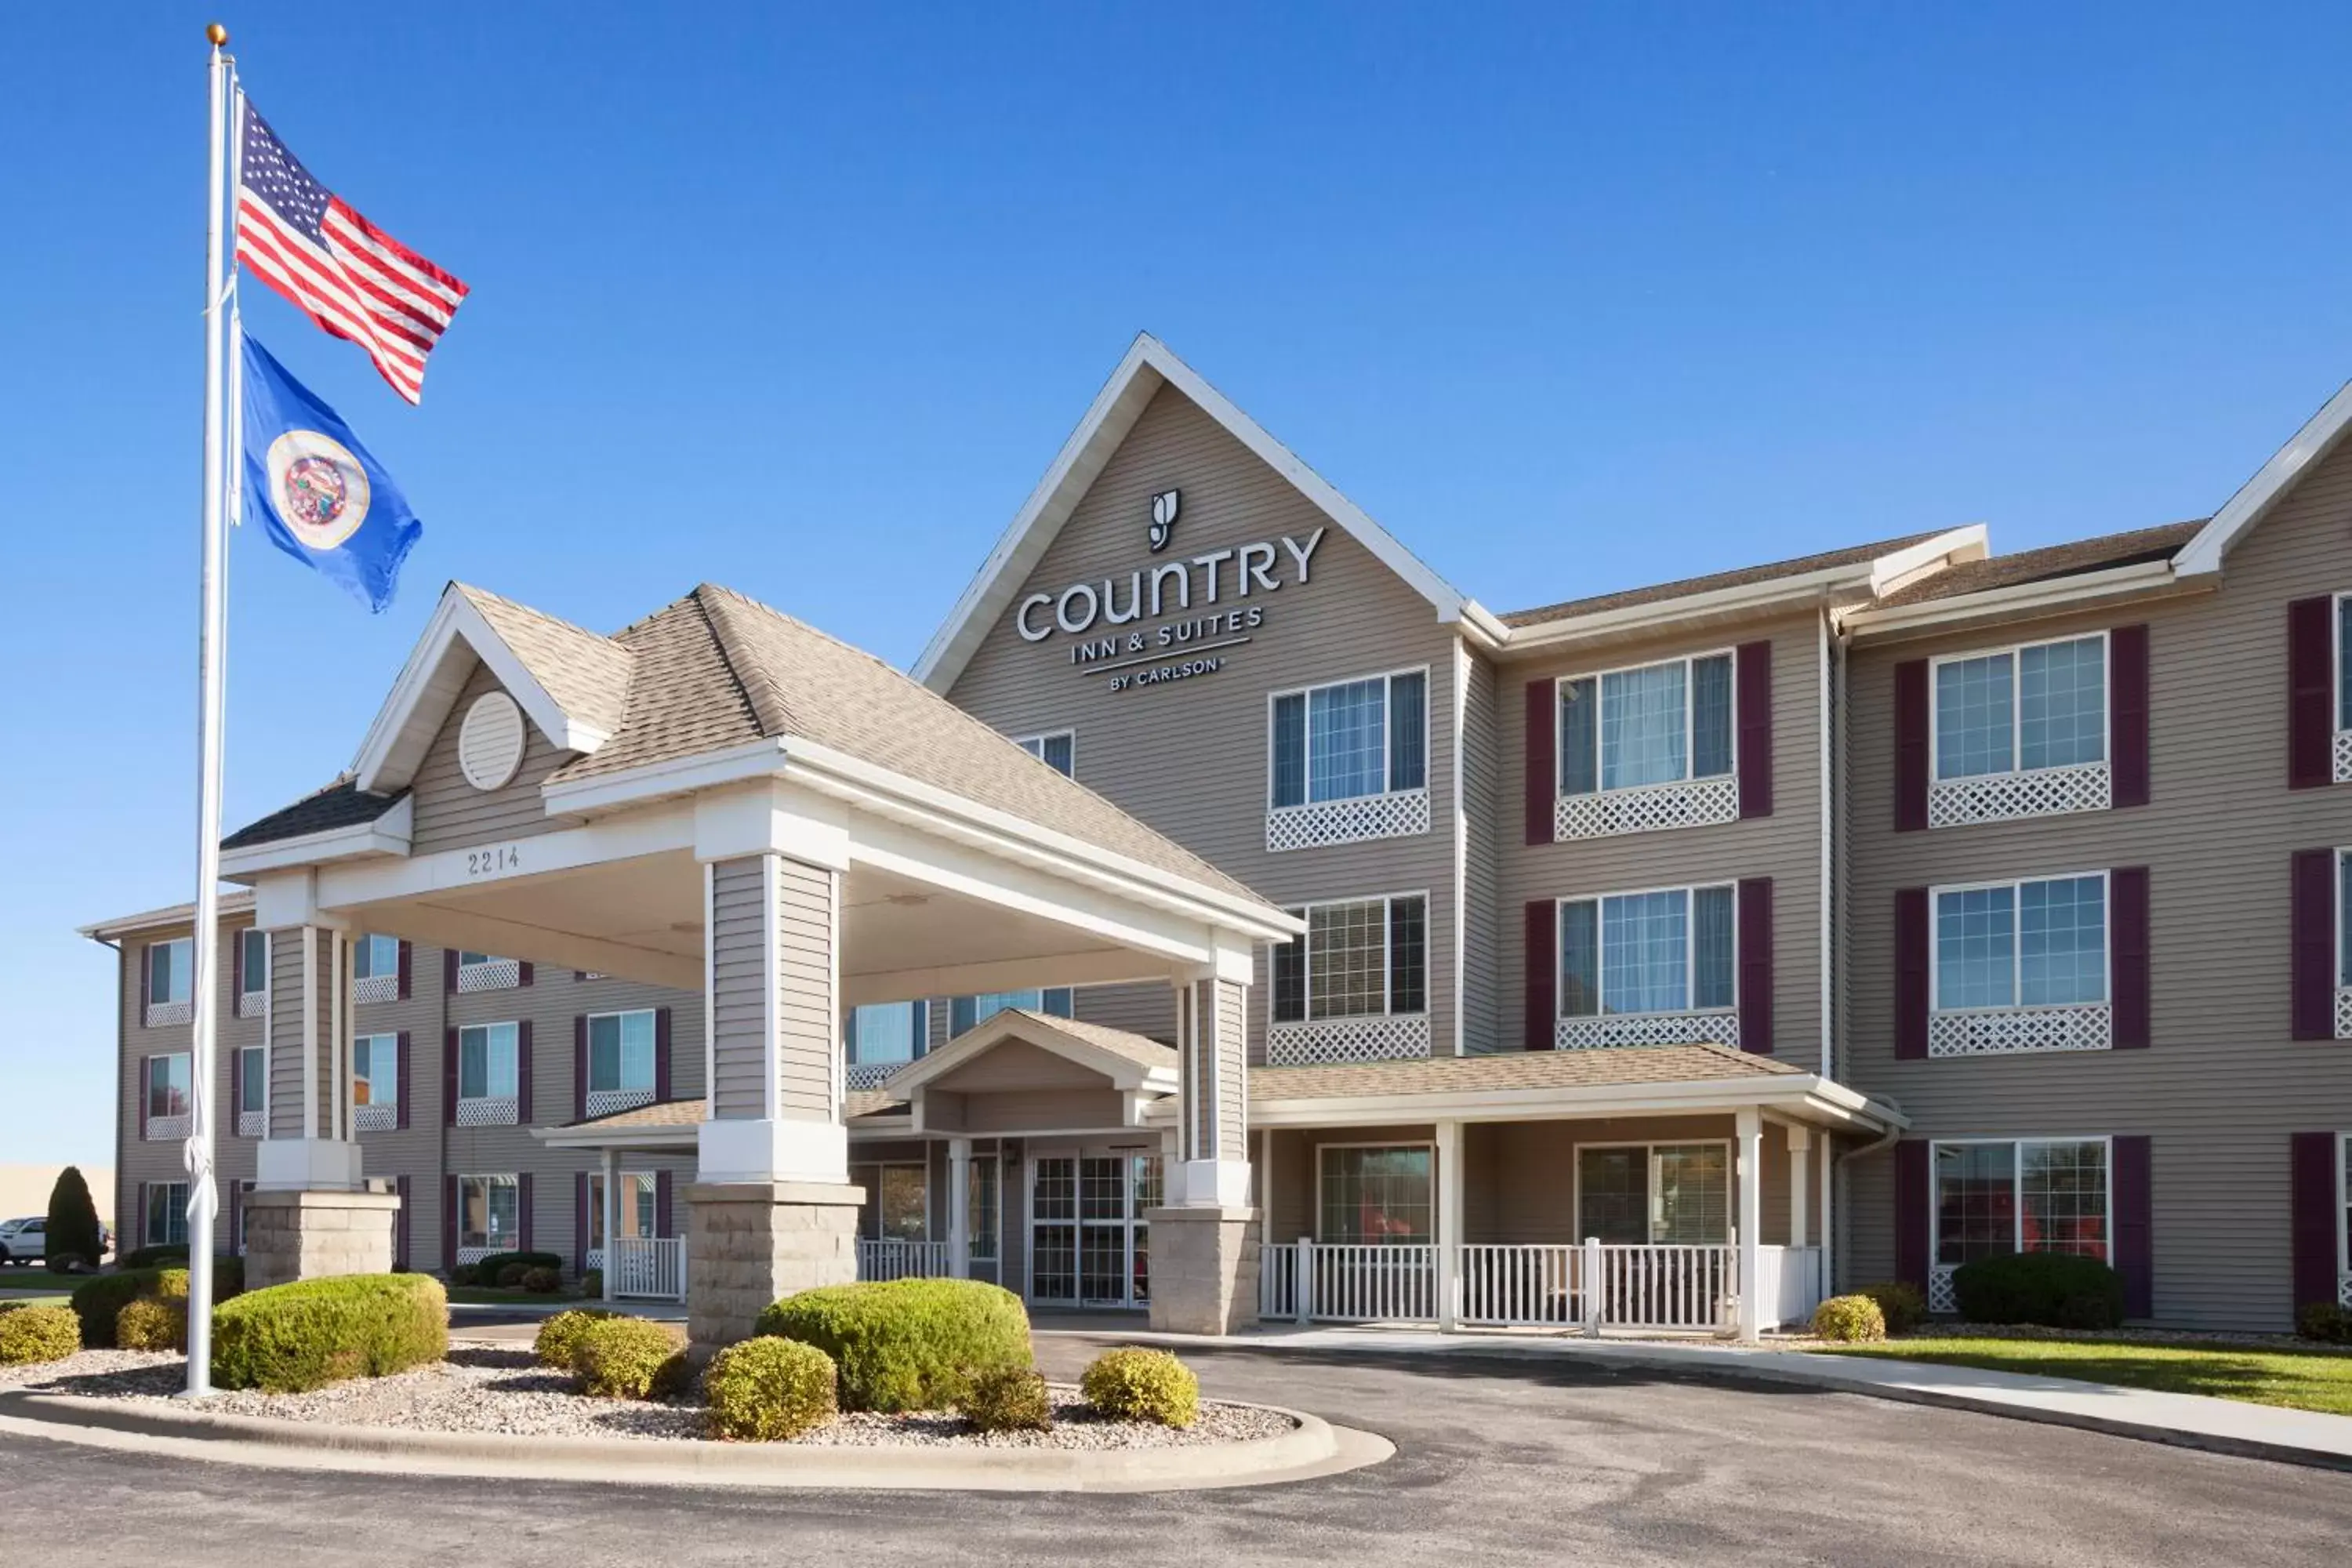 Facade/entrance, Property Building in Country Inn & Suites by Radisson, Albert Lea, MN